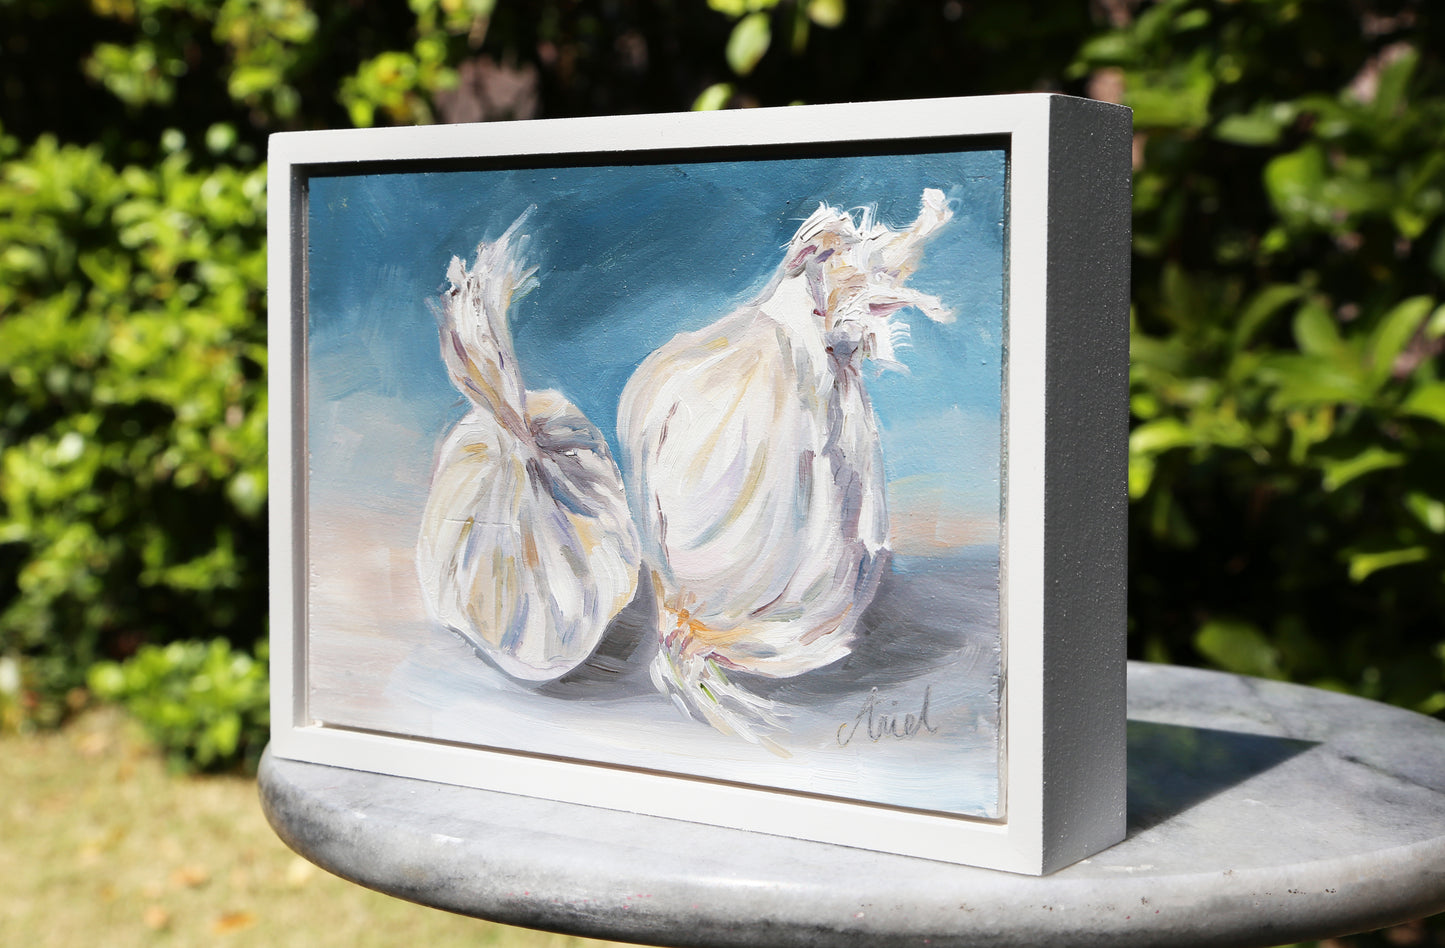 Introduce a touch of elegance to your home with Always Garlic. This original oil painting comes ready to hang in a white frame, and features a beautiful depiction of garlic in shades of blue. Elevate your home decor with this contemporary and fine art piece.